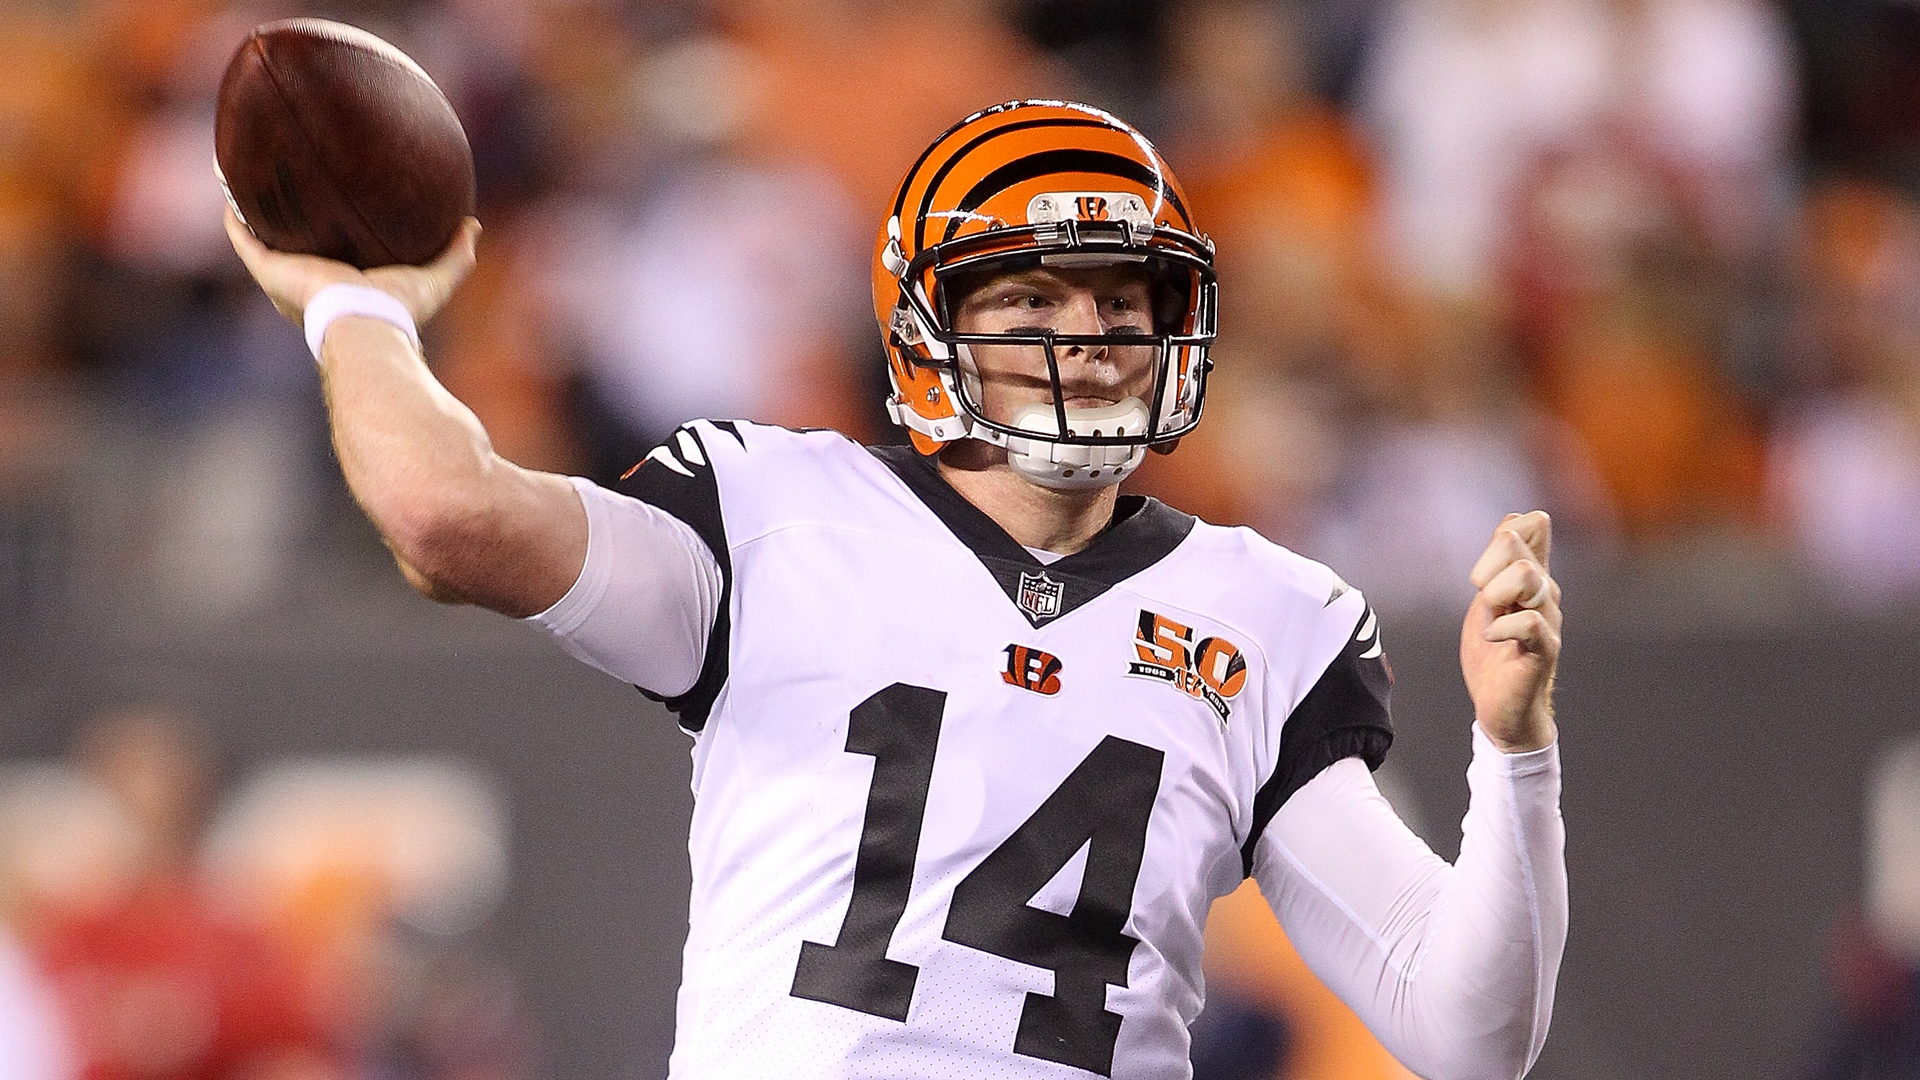 Andy Dalton is only focused on winning as the Cincinnati Bengals eye the NFL playoffs.